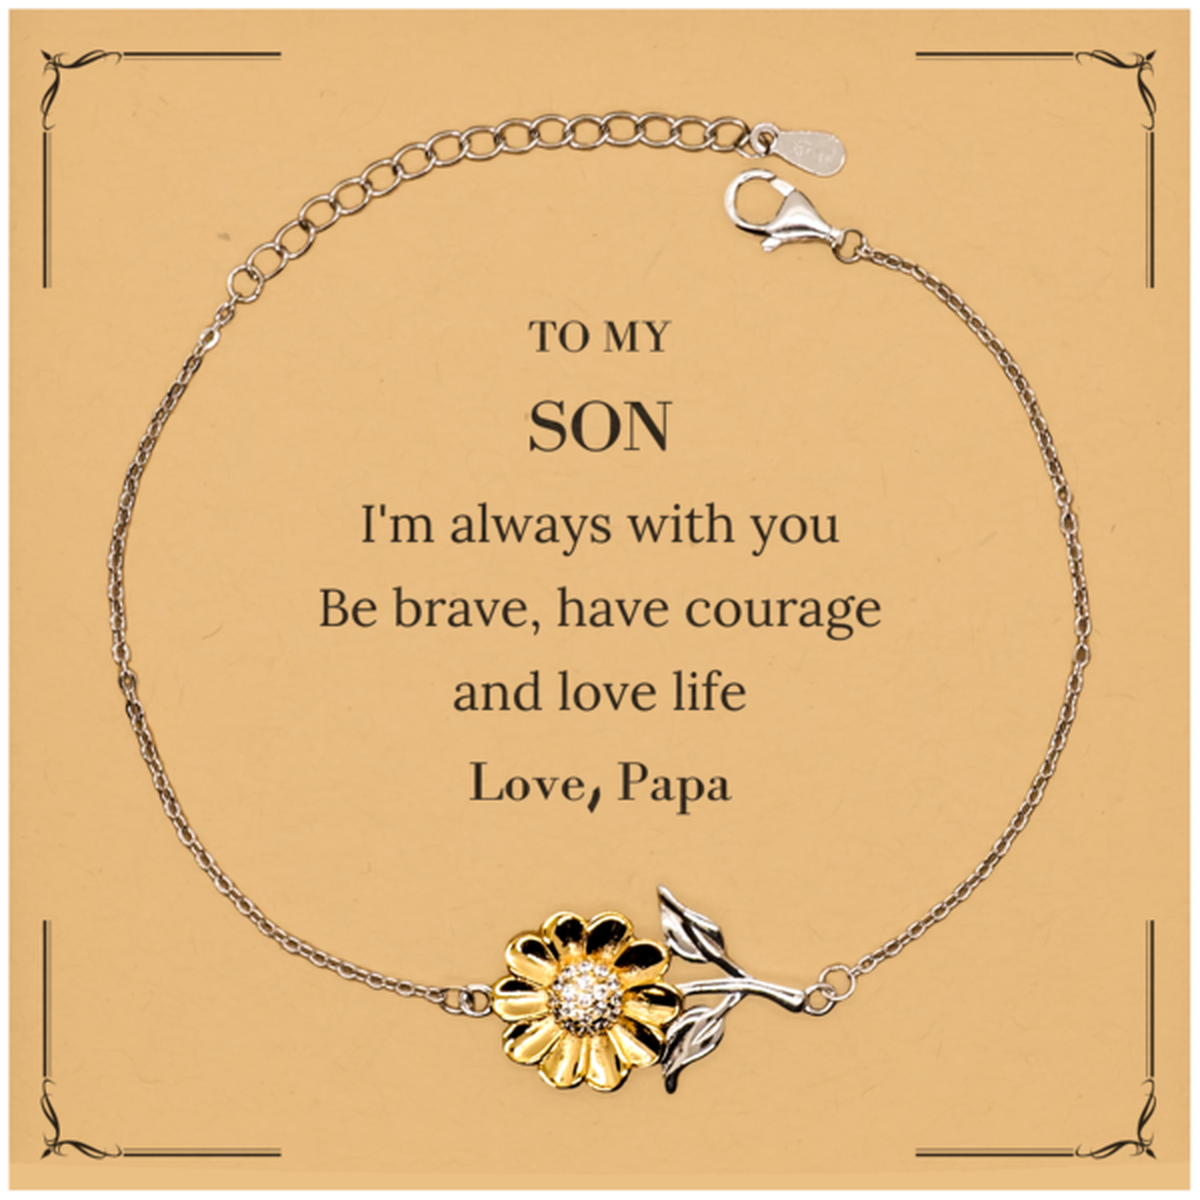 To My Son Gifts from Papa, Unique Sunflower Bracelet Inspirational Christmas Birthday Graduation Gifts for Son I'm always with you. Be brave, have courage and love life. Love, Papa